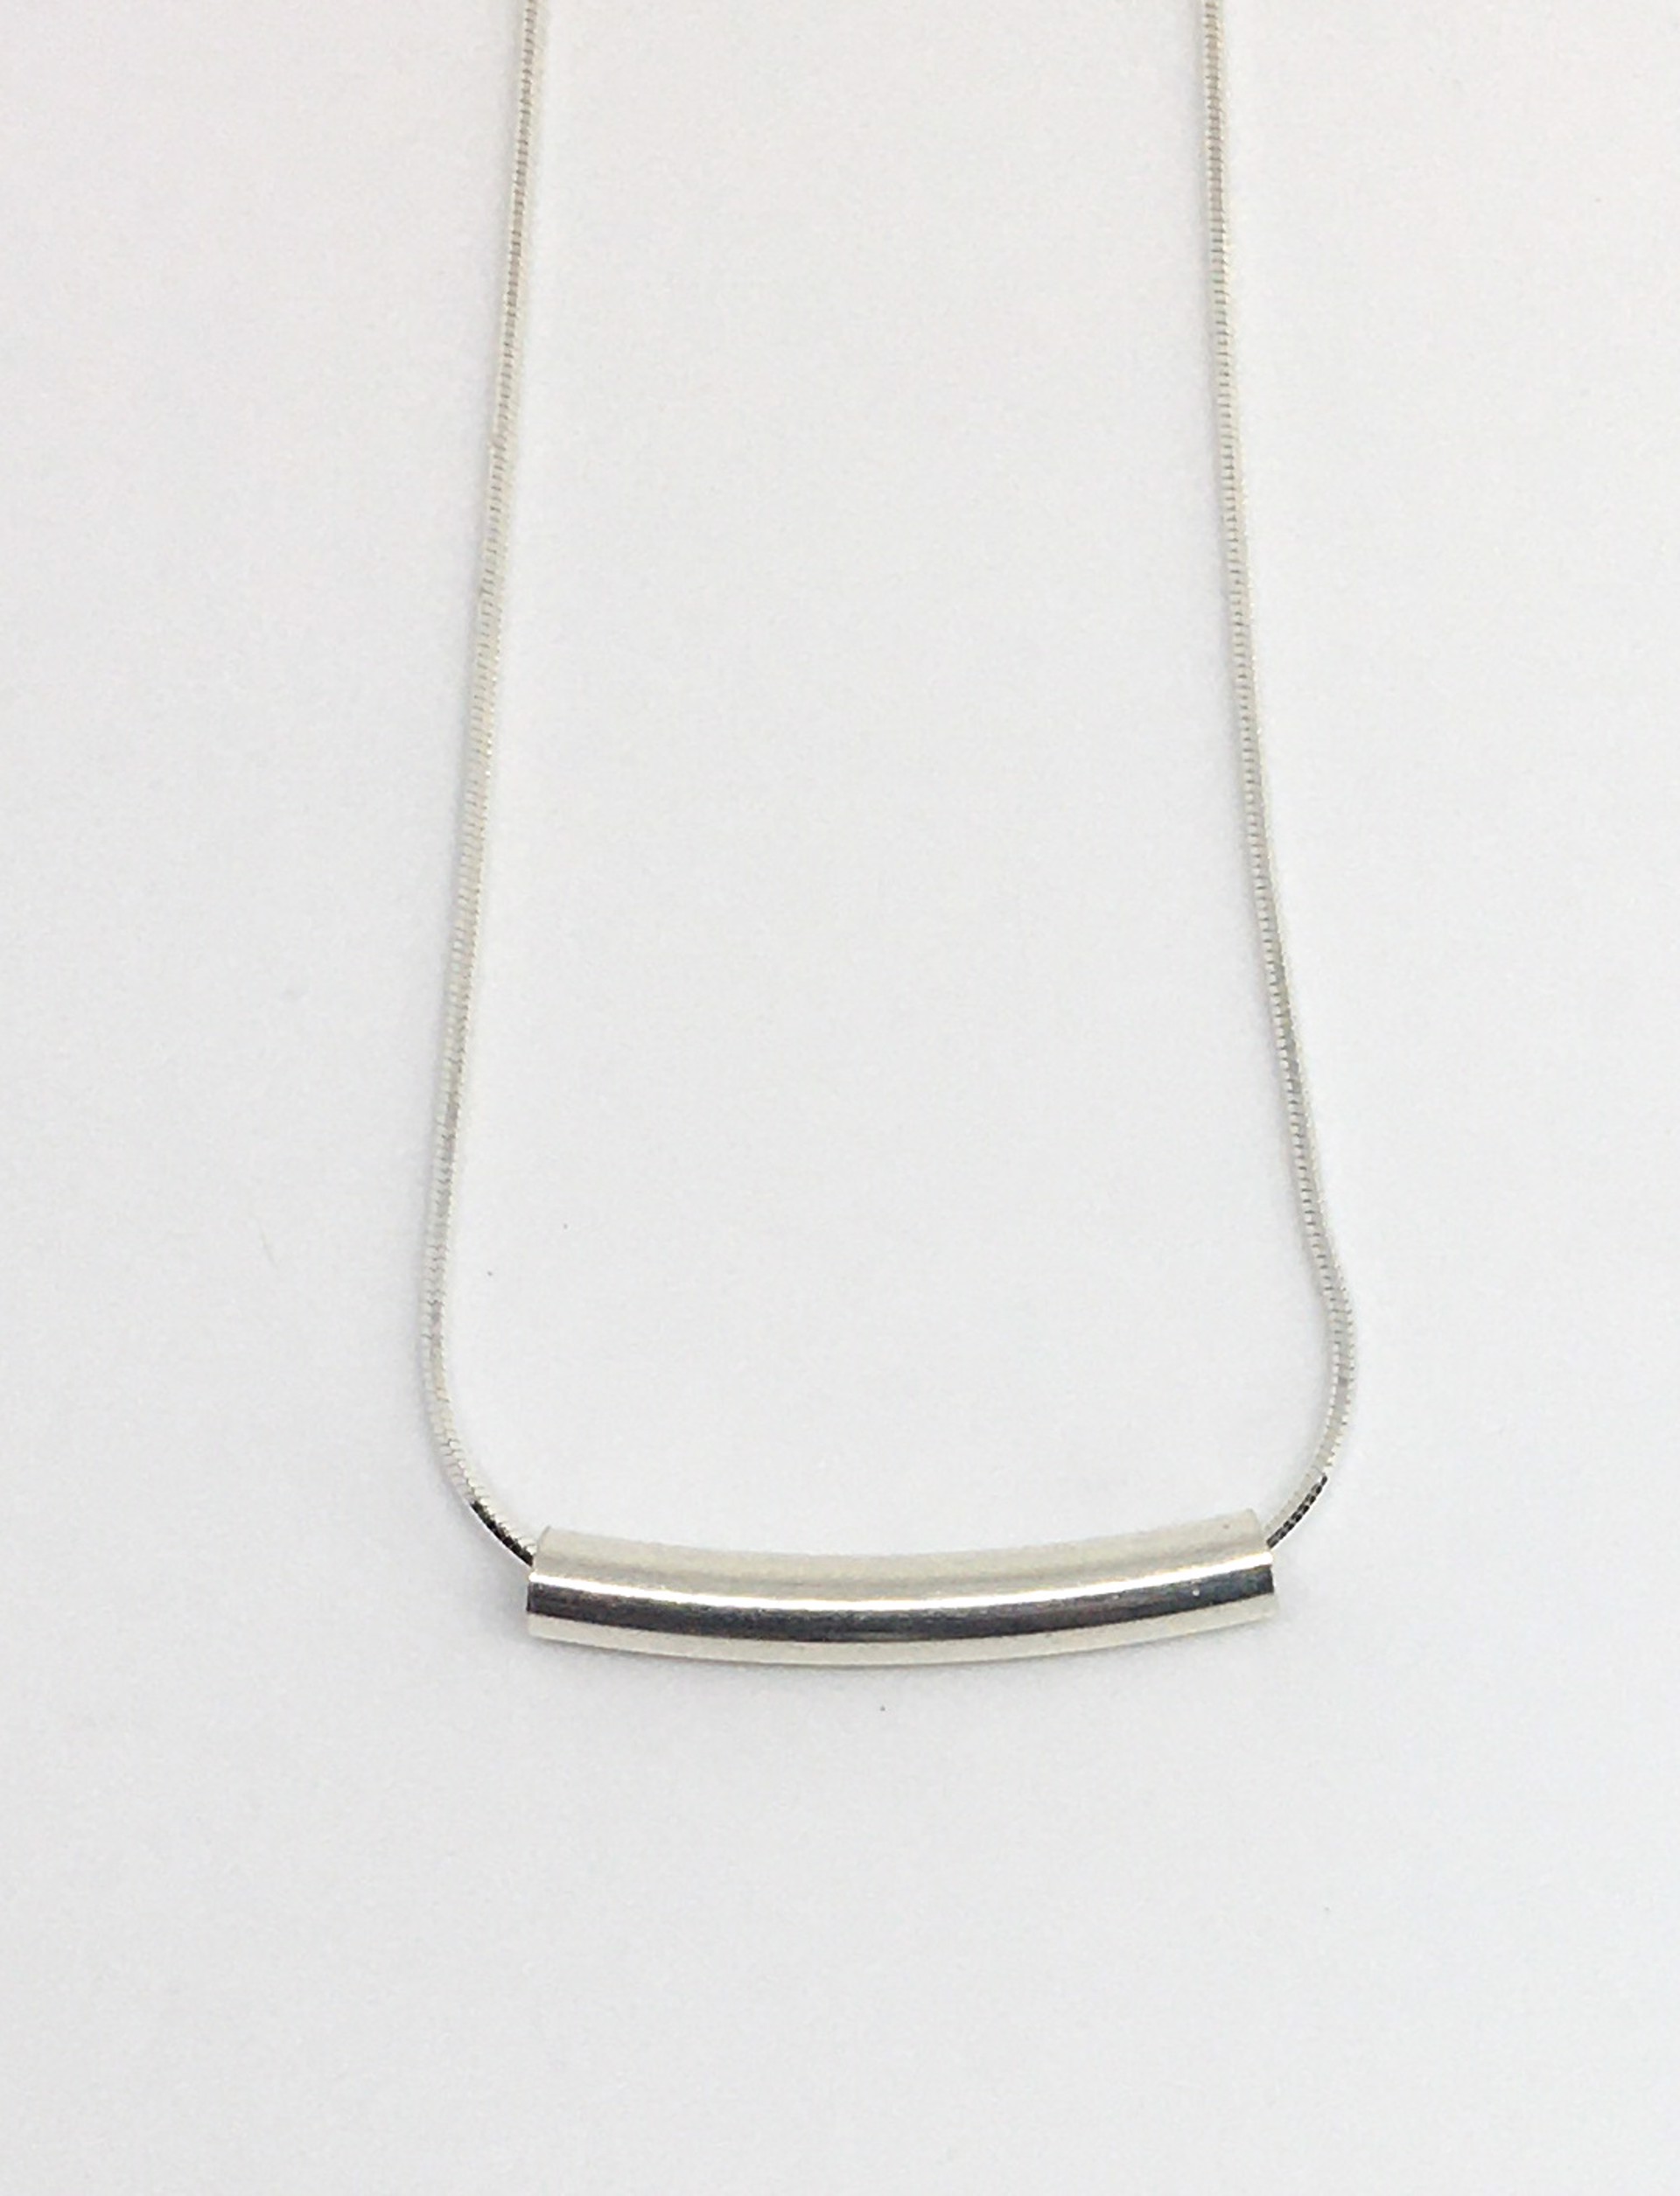 Eunity Silver Tube Necklace - Sterling Silver by Suzanne Woodworth